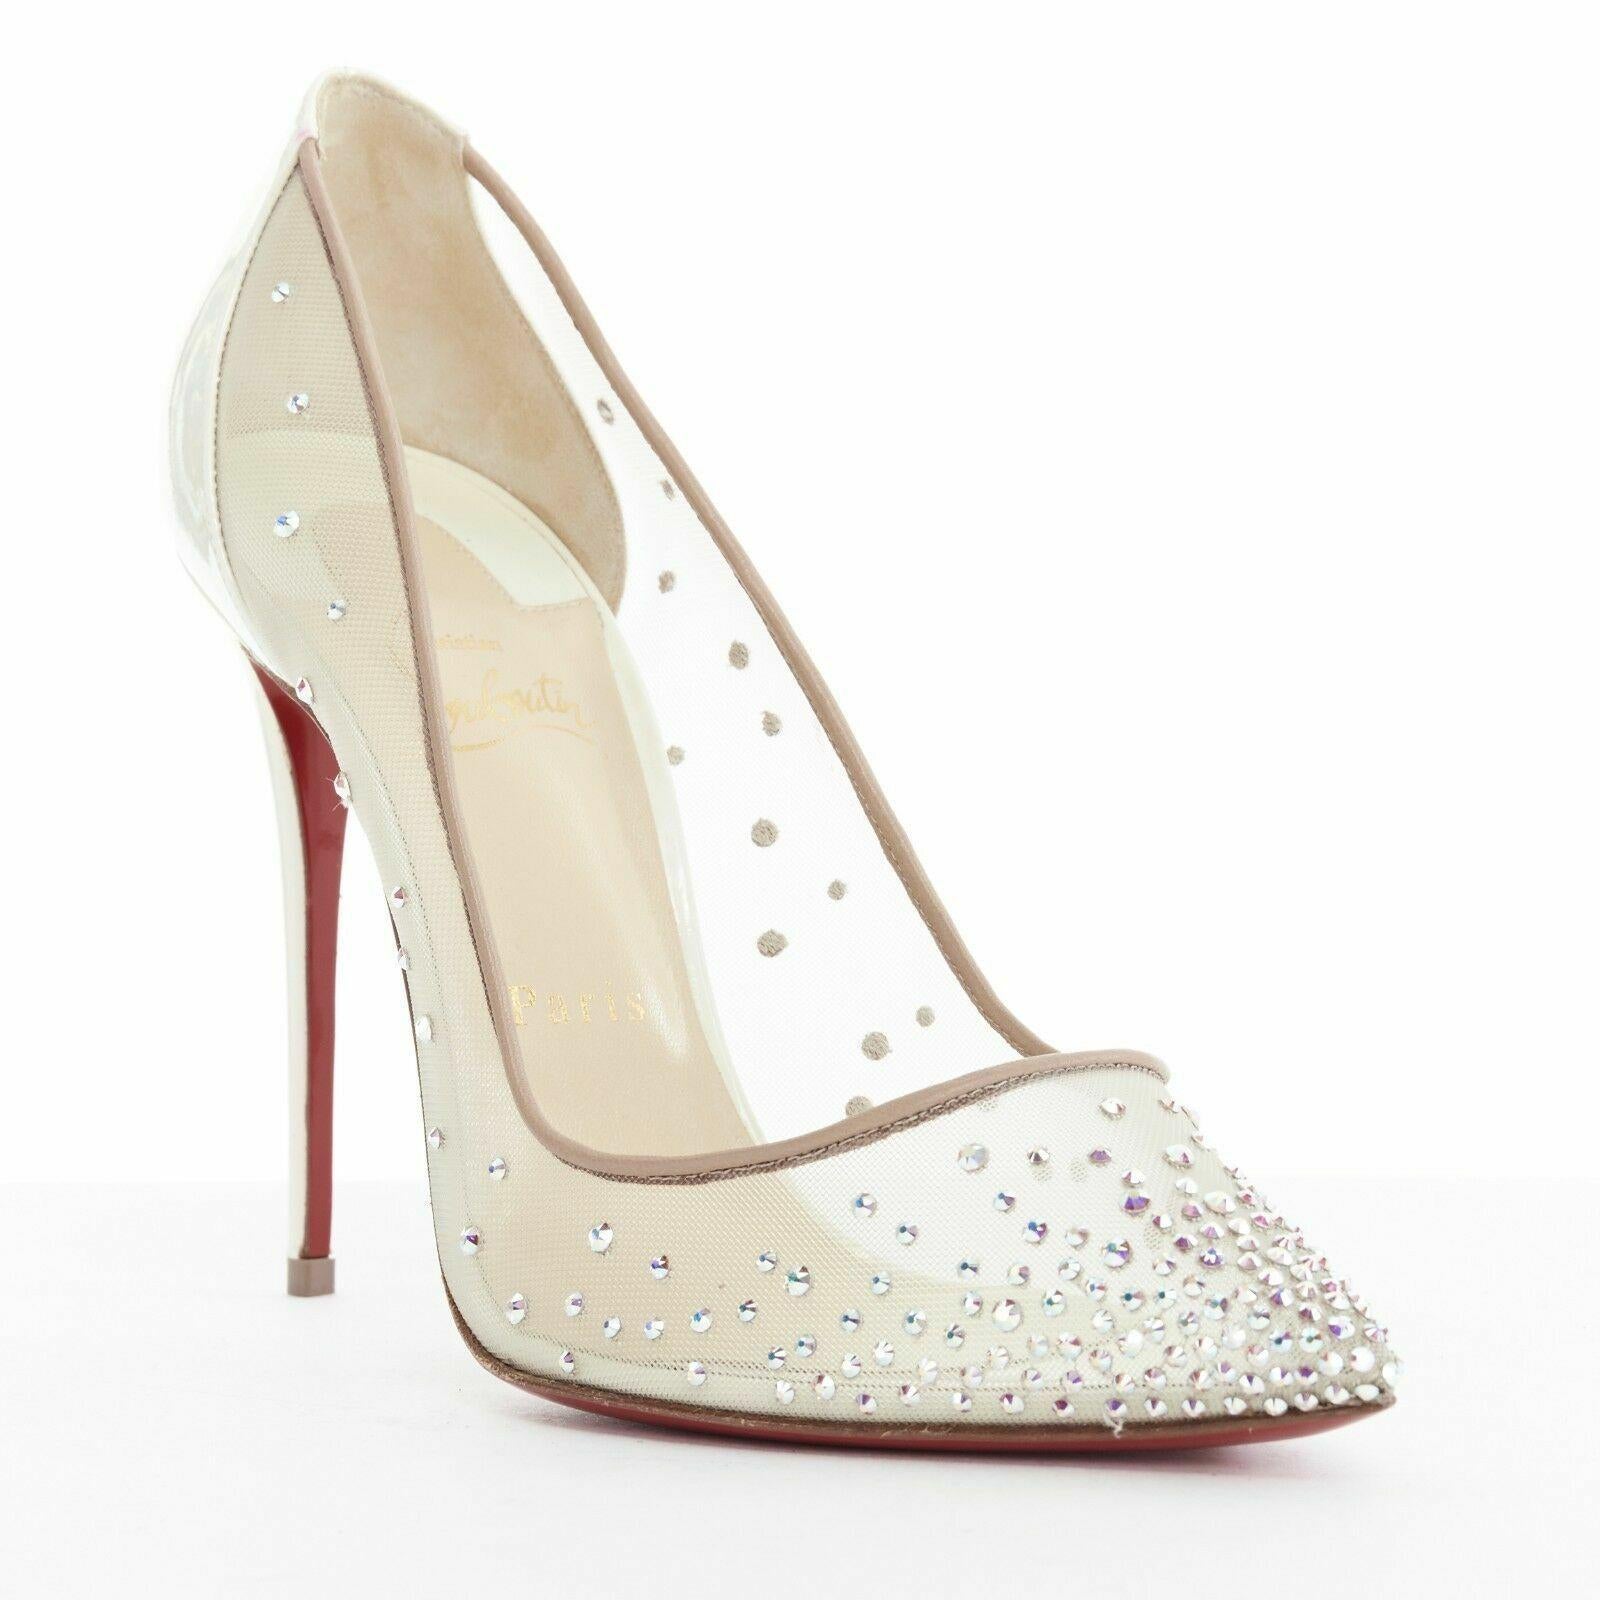 new CHRISTIAN LOUBOUTIN Follies Strass mesh crystal iridescent white pumps EU41
CHRISTIAN LOUBOUTIN
Follies Strass 100. Iridescent white patent heel. 
Sheer mesh upper. Gradient strass crystal embellishment- each crystal is embellished on mesh.